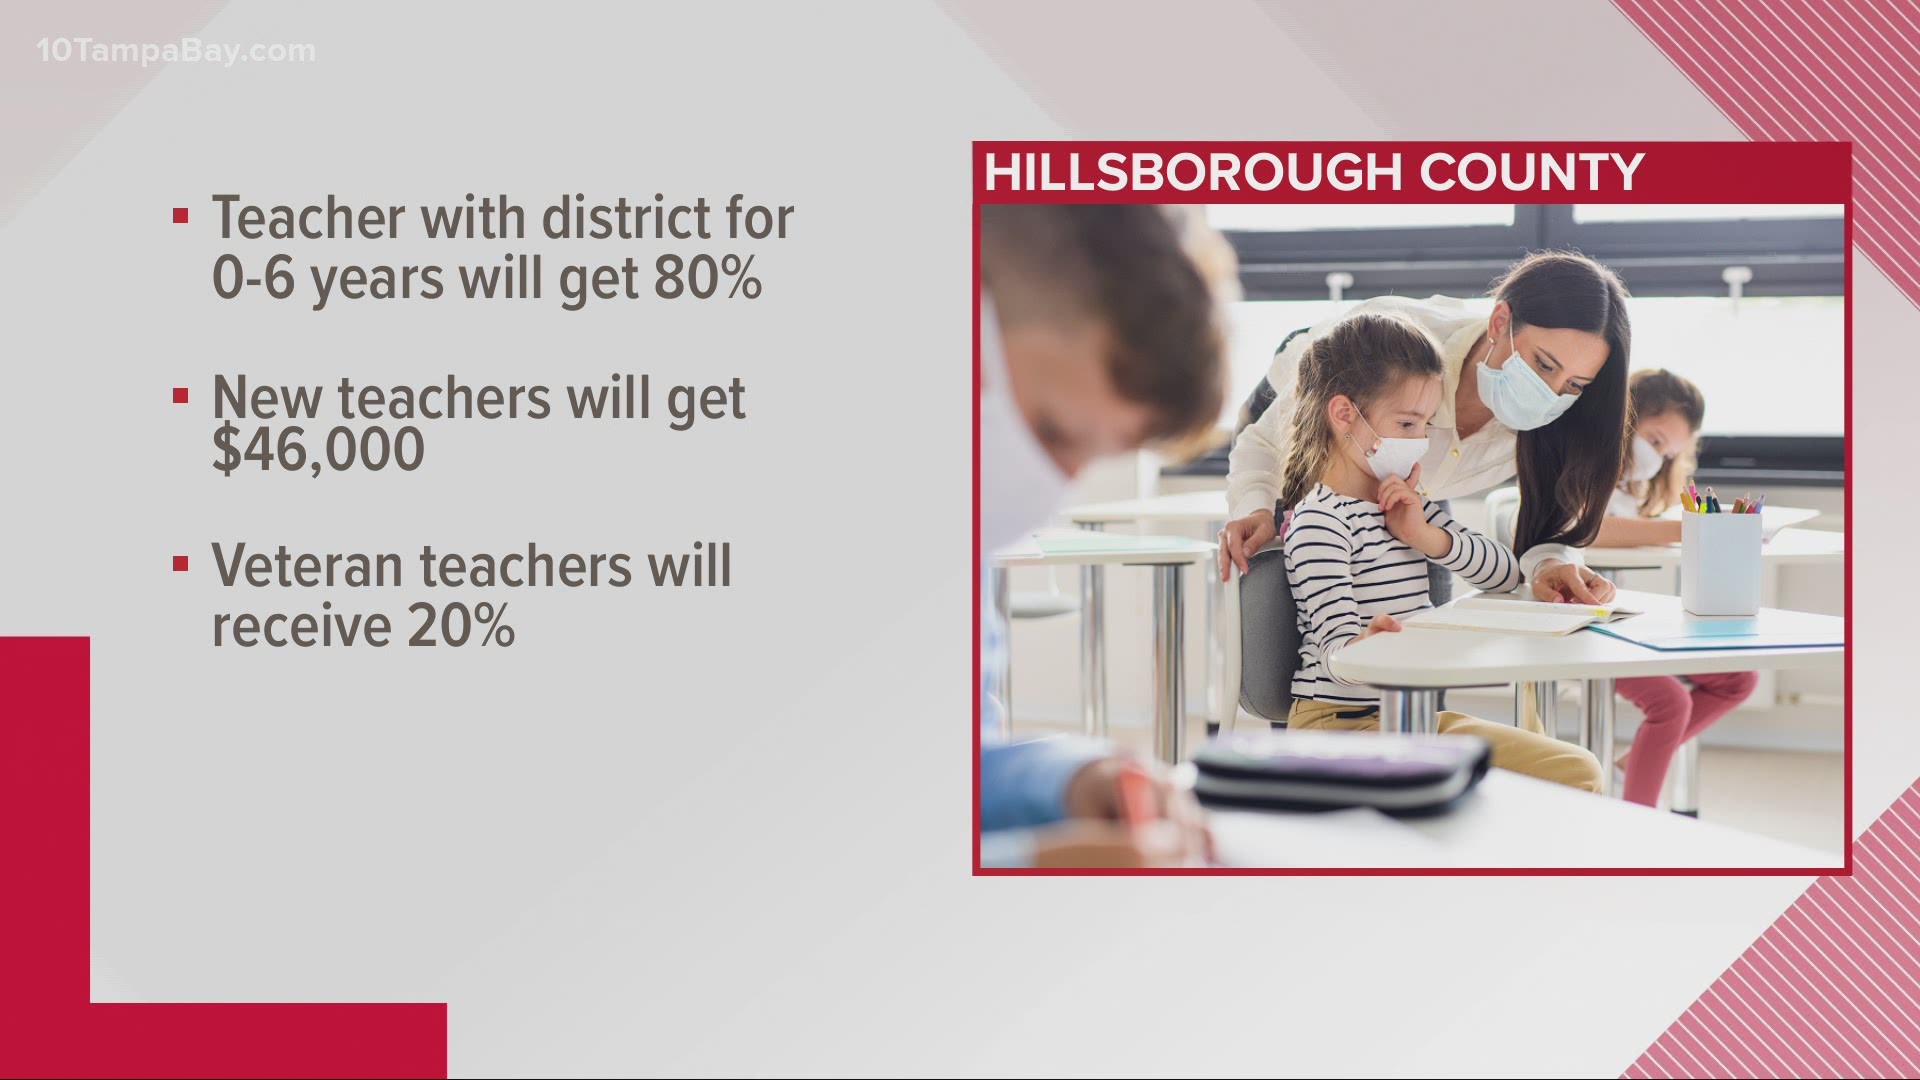 Teachers and families in Hillsborough County are urging district leaders to find alternative ways to make up for the funding deficit rather than teacher cuts.